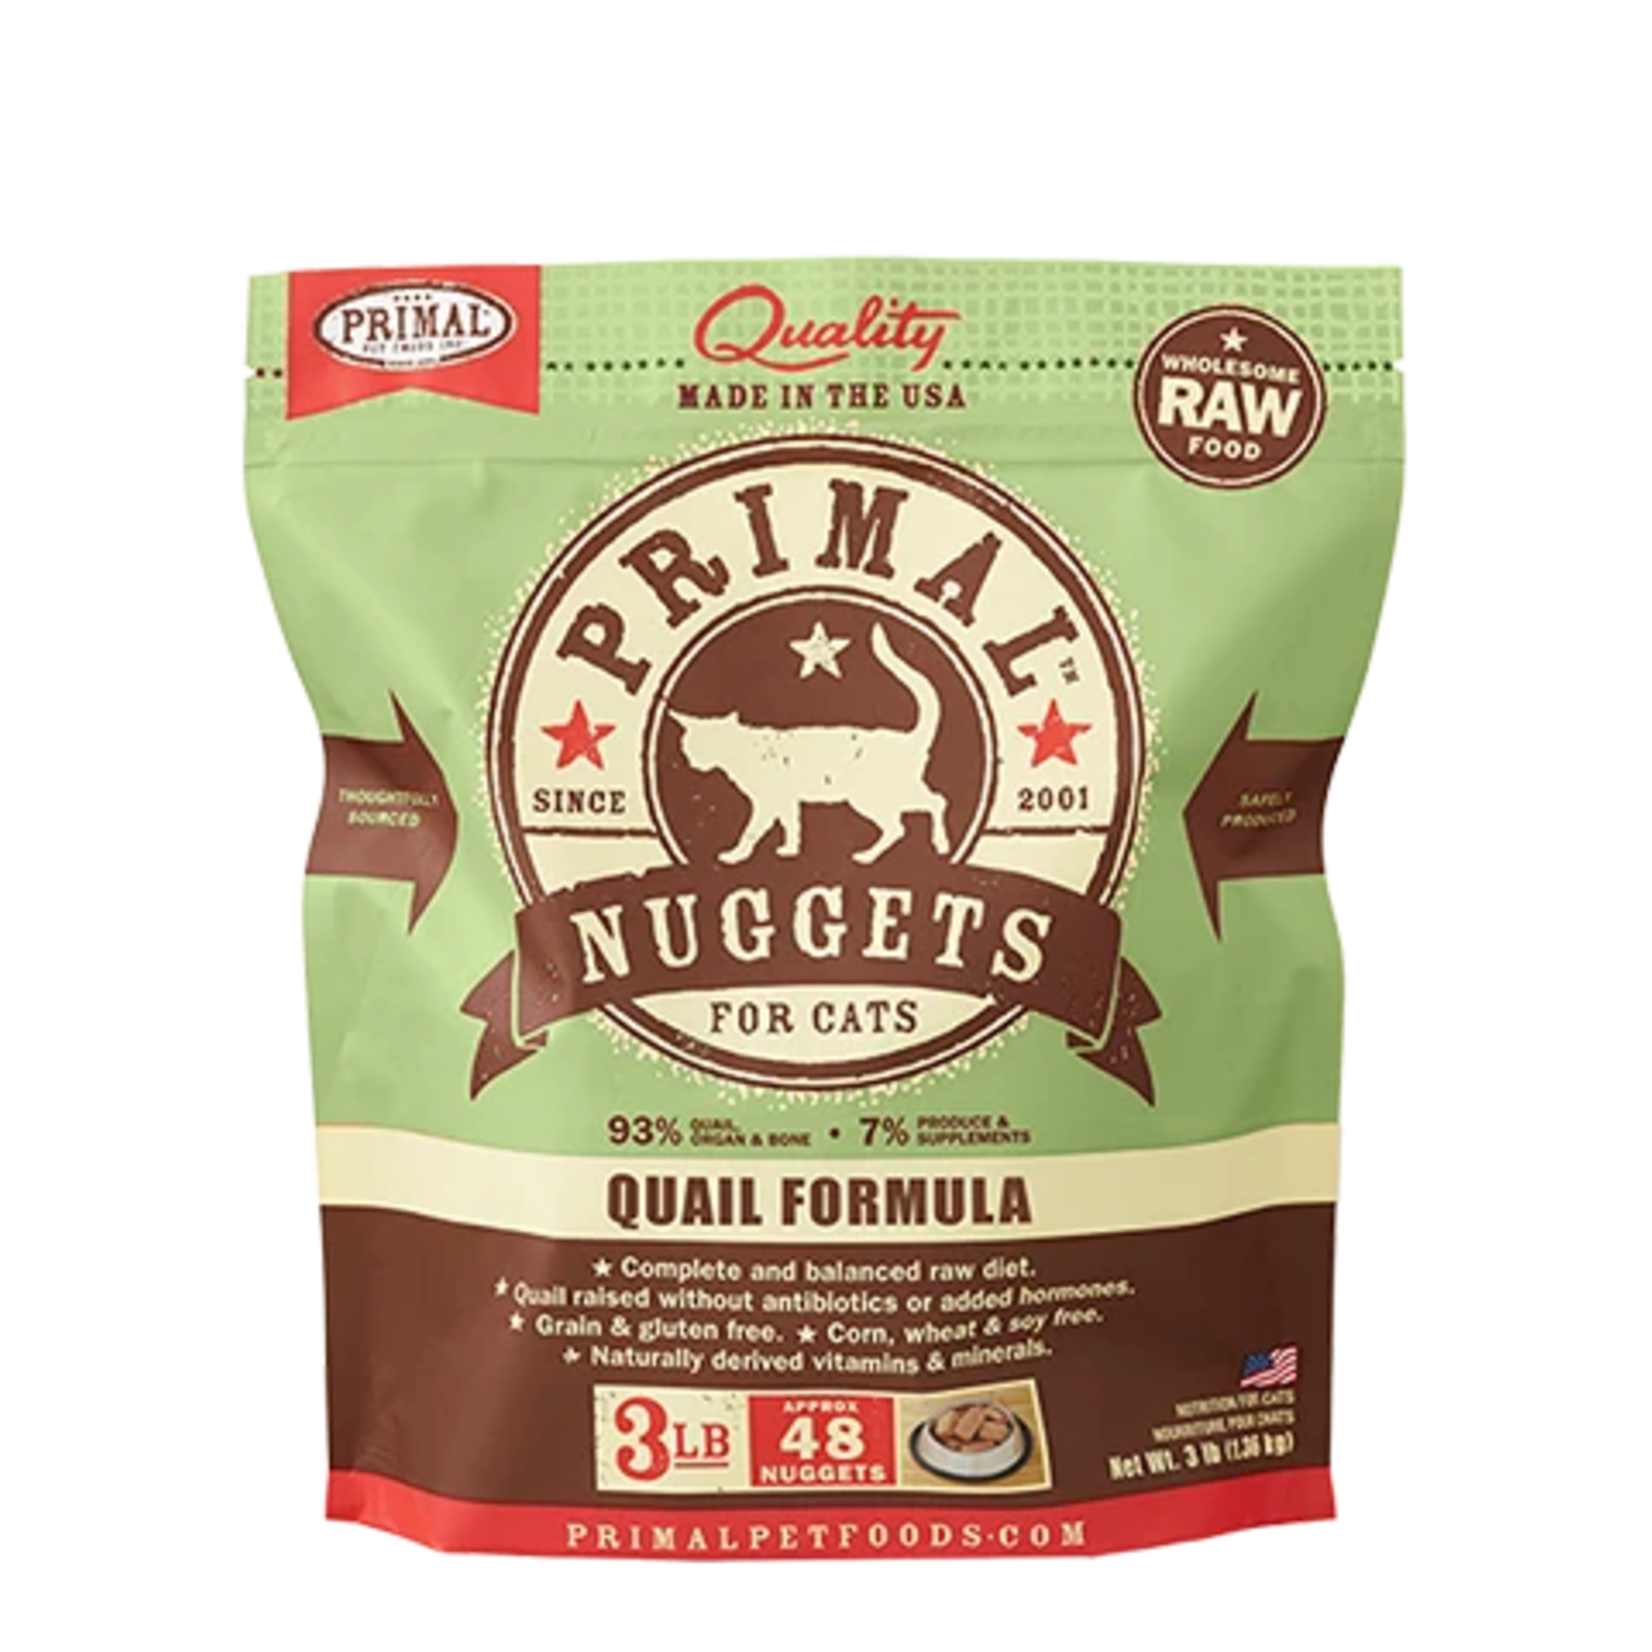 Primal Pet Foods Primal Frozen Raw Nuggets - Quail Formula for Cats